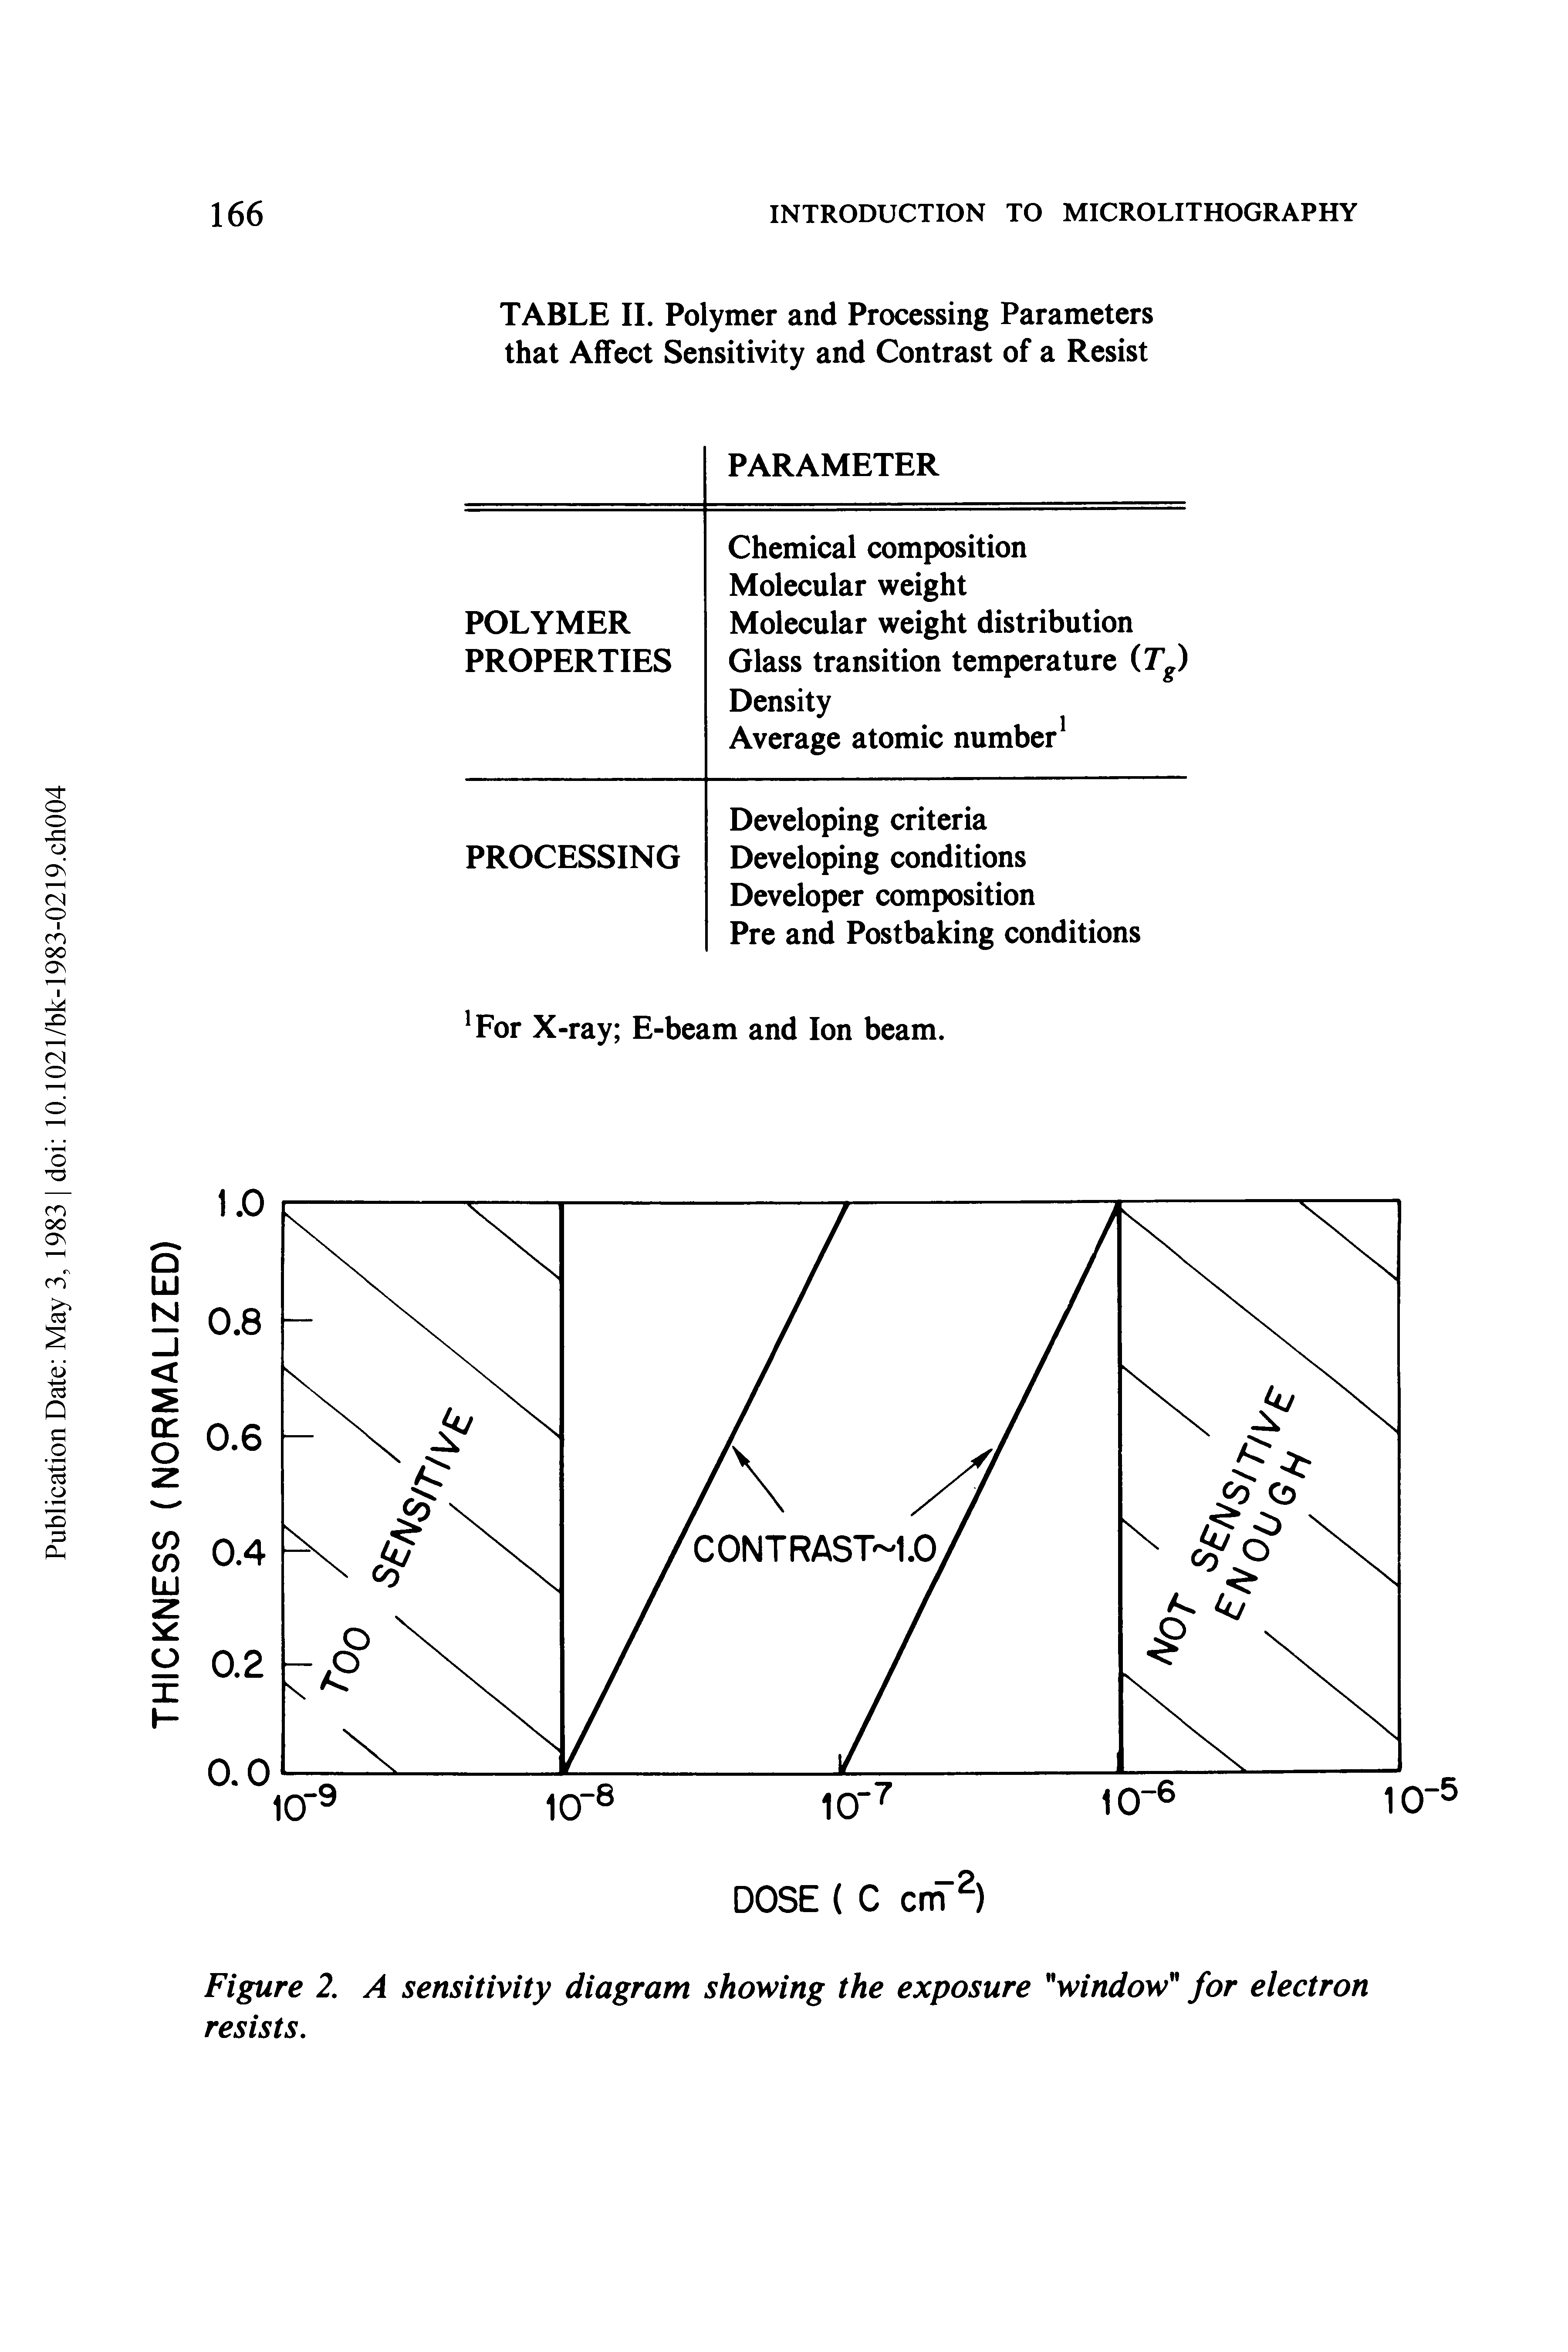 Figure 2. A sensitivity diagram showing the exposure window for electron resists.